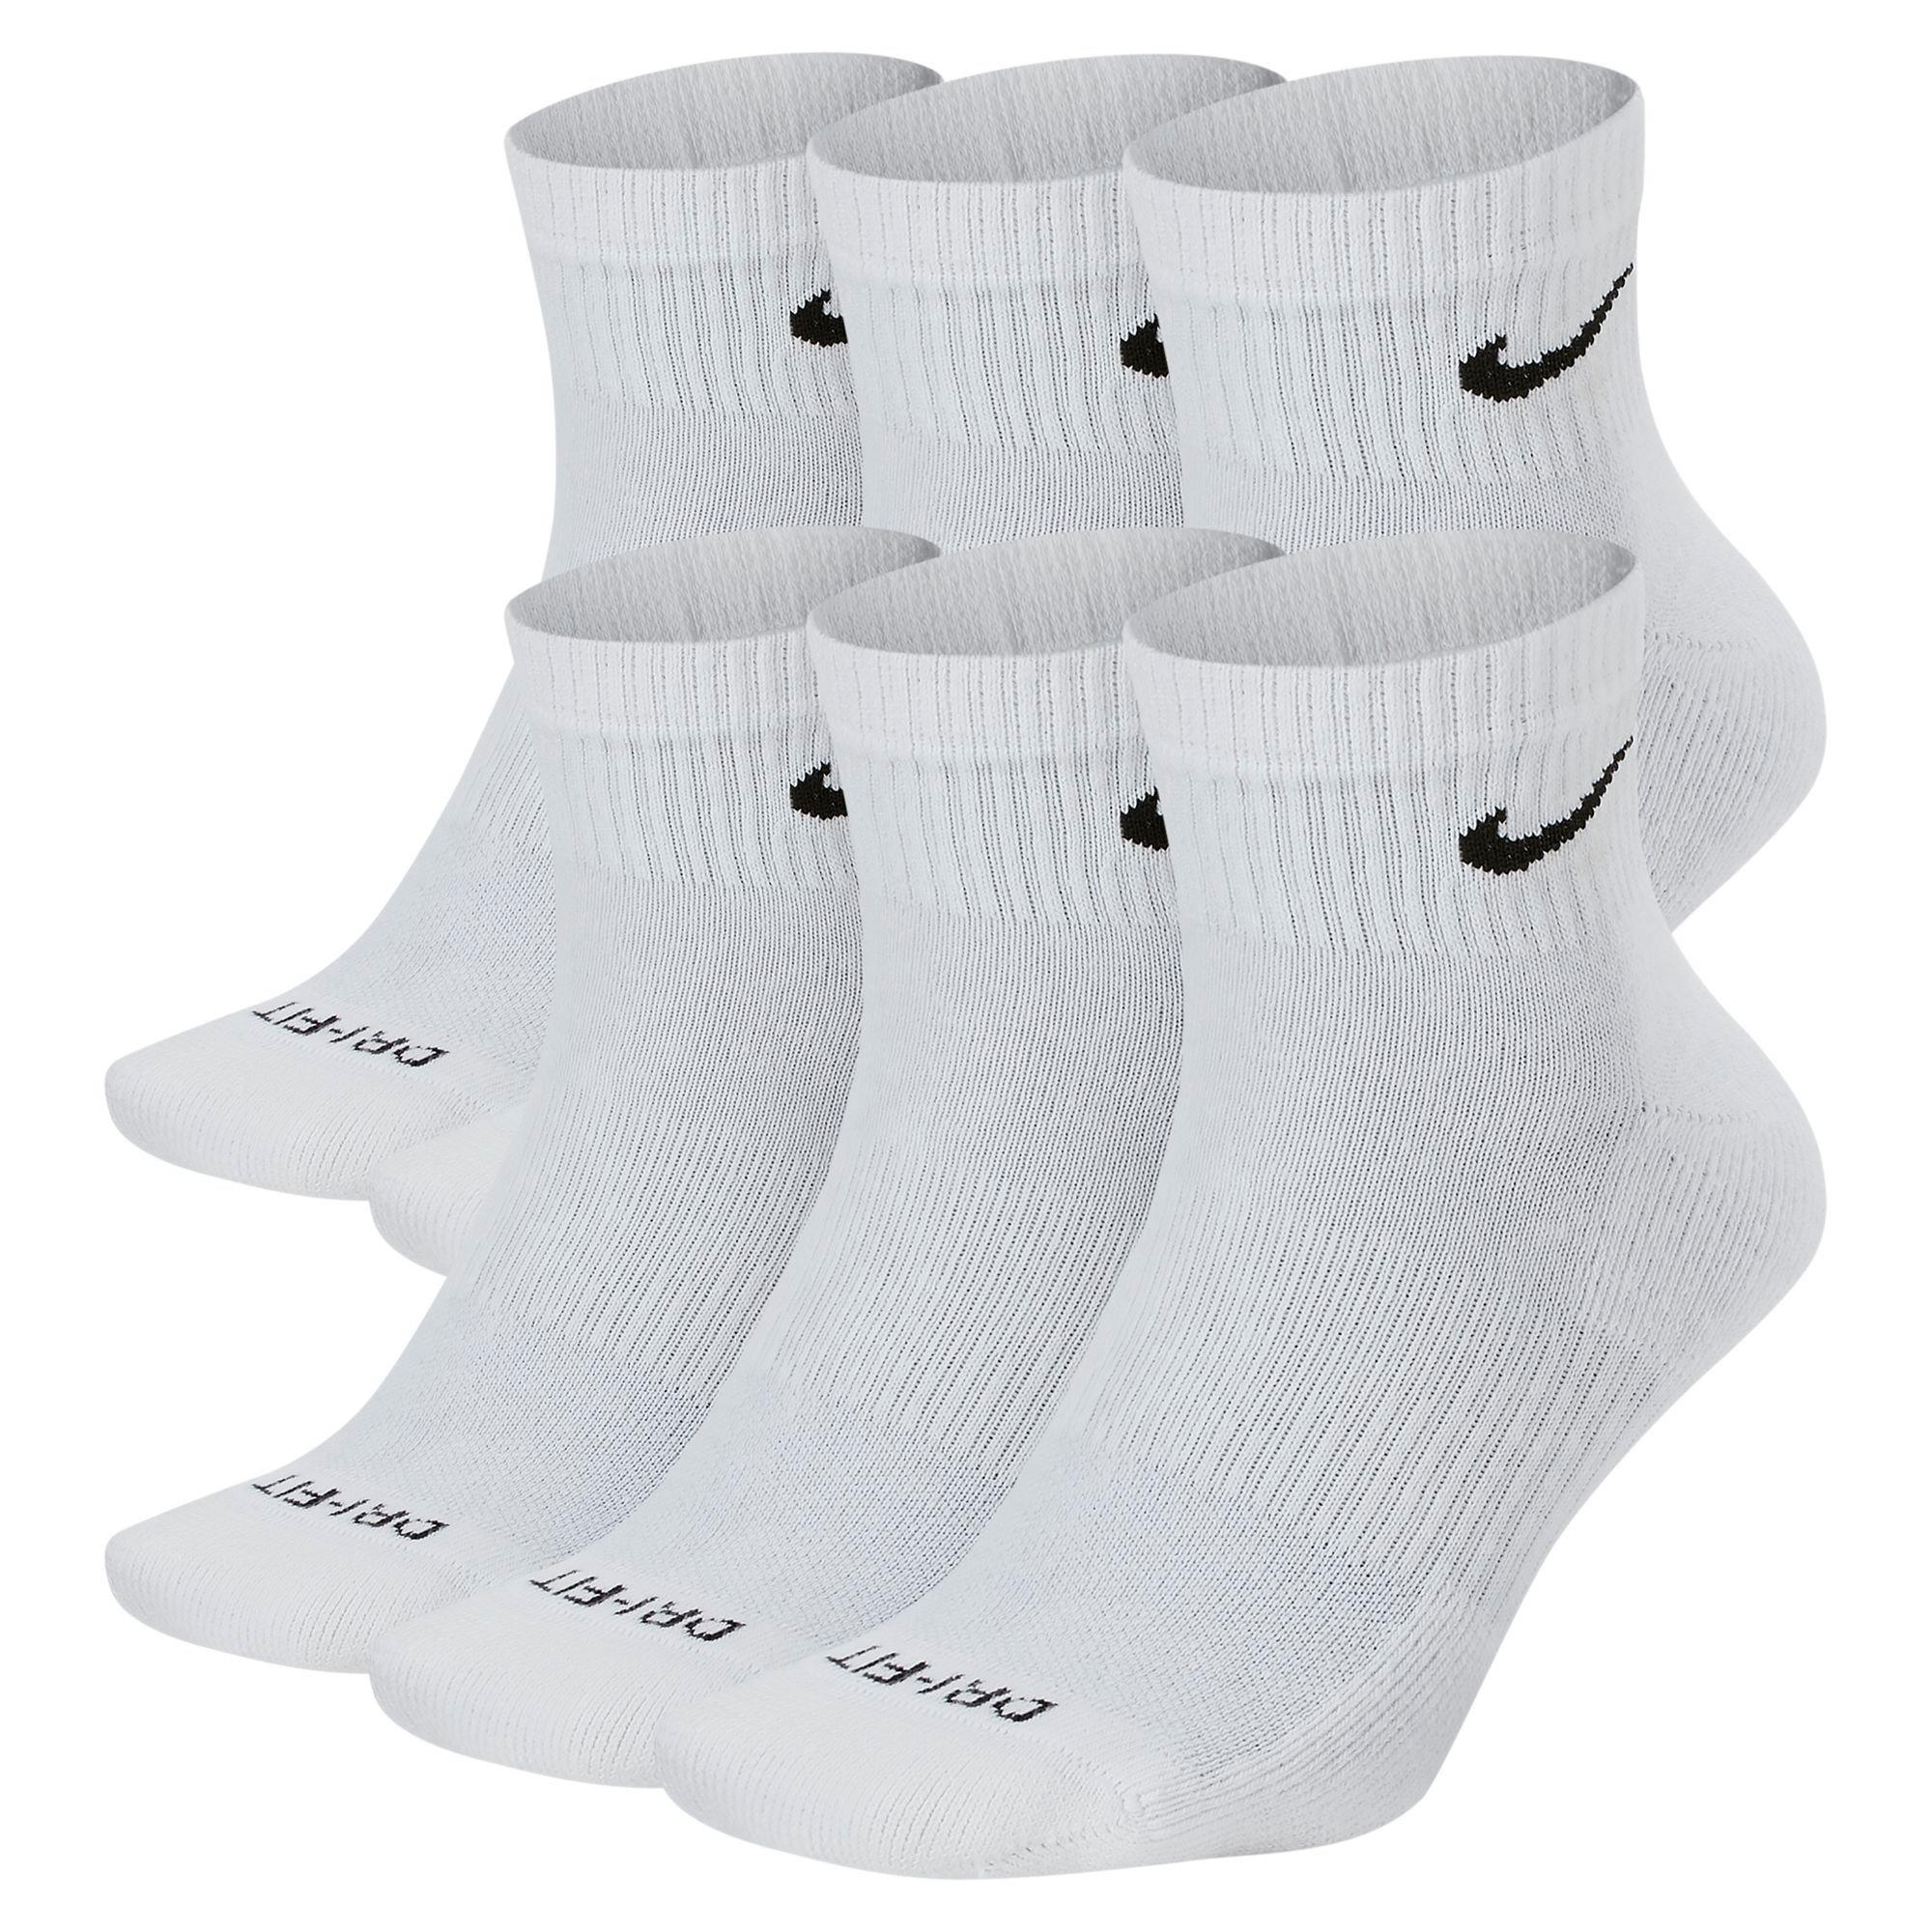 Nike Squad Adult White Polyester Dri-Fit Swoosh Logo Soccer Leg Sleeves S/M  6-8 for sale online